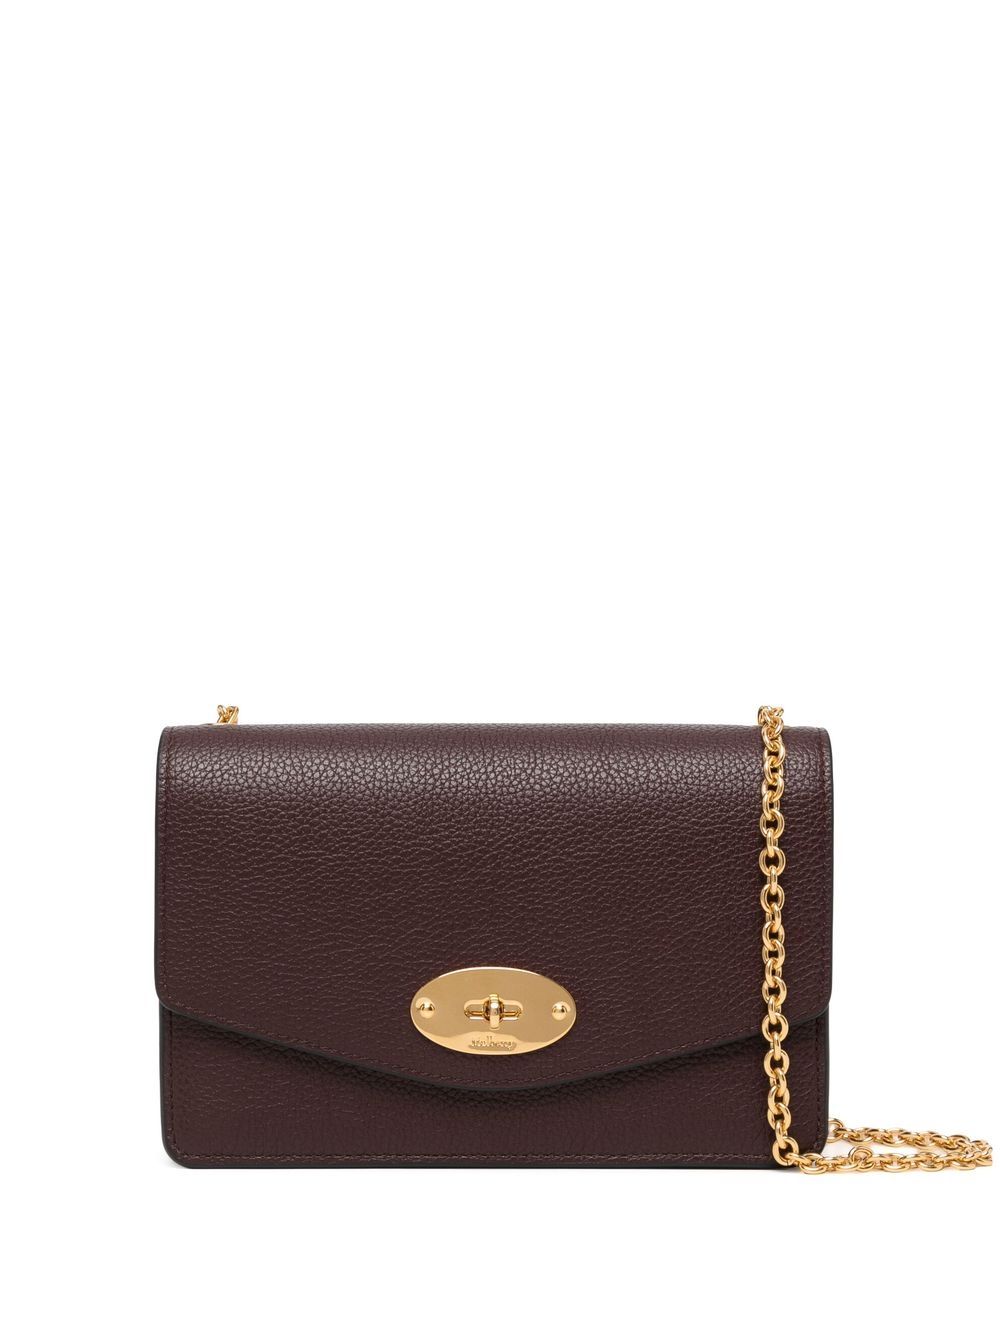 Mulberry small Darcey crossbody bag - Brown von Mulberry